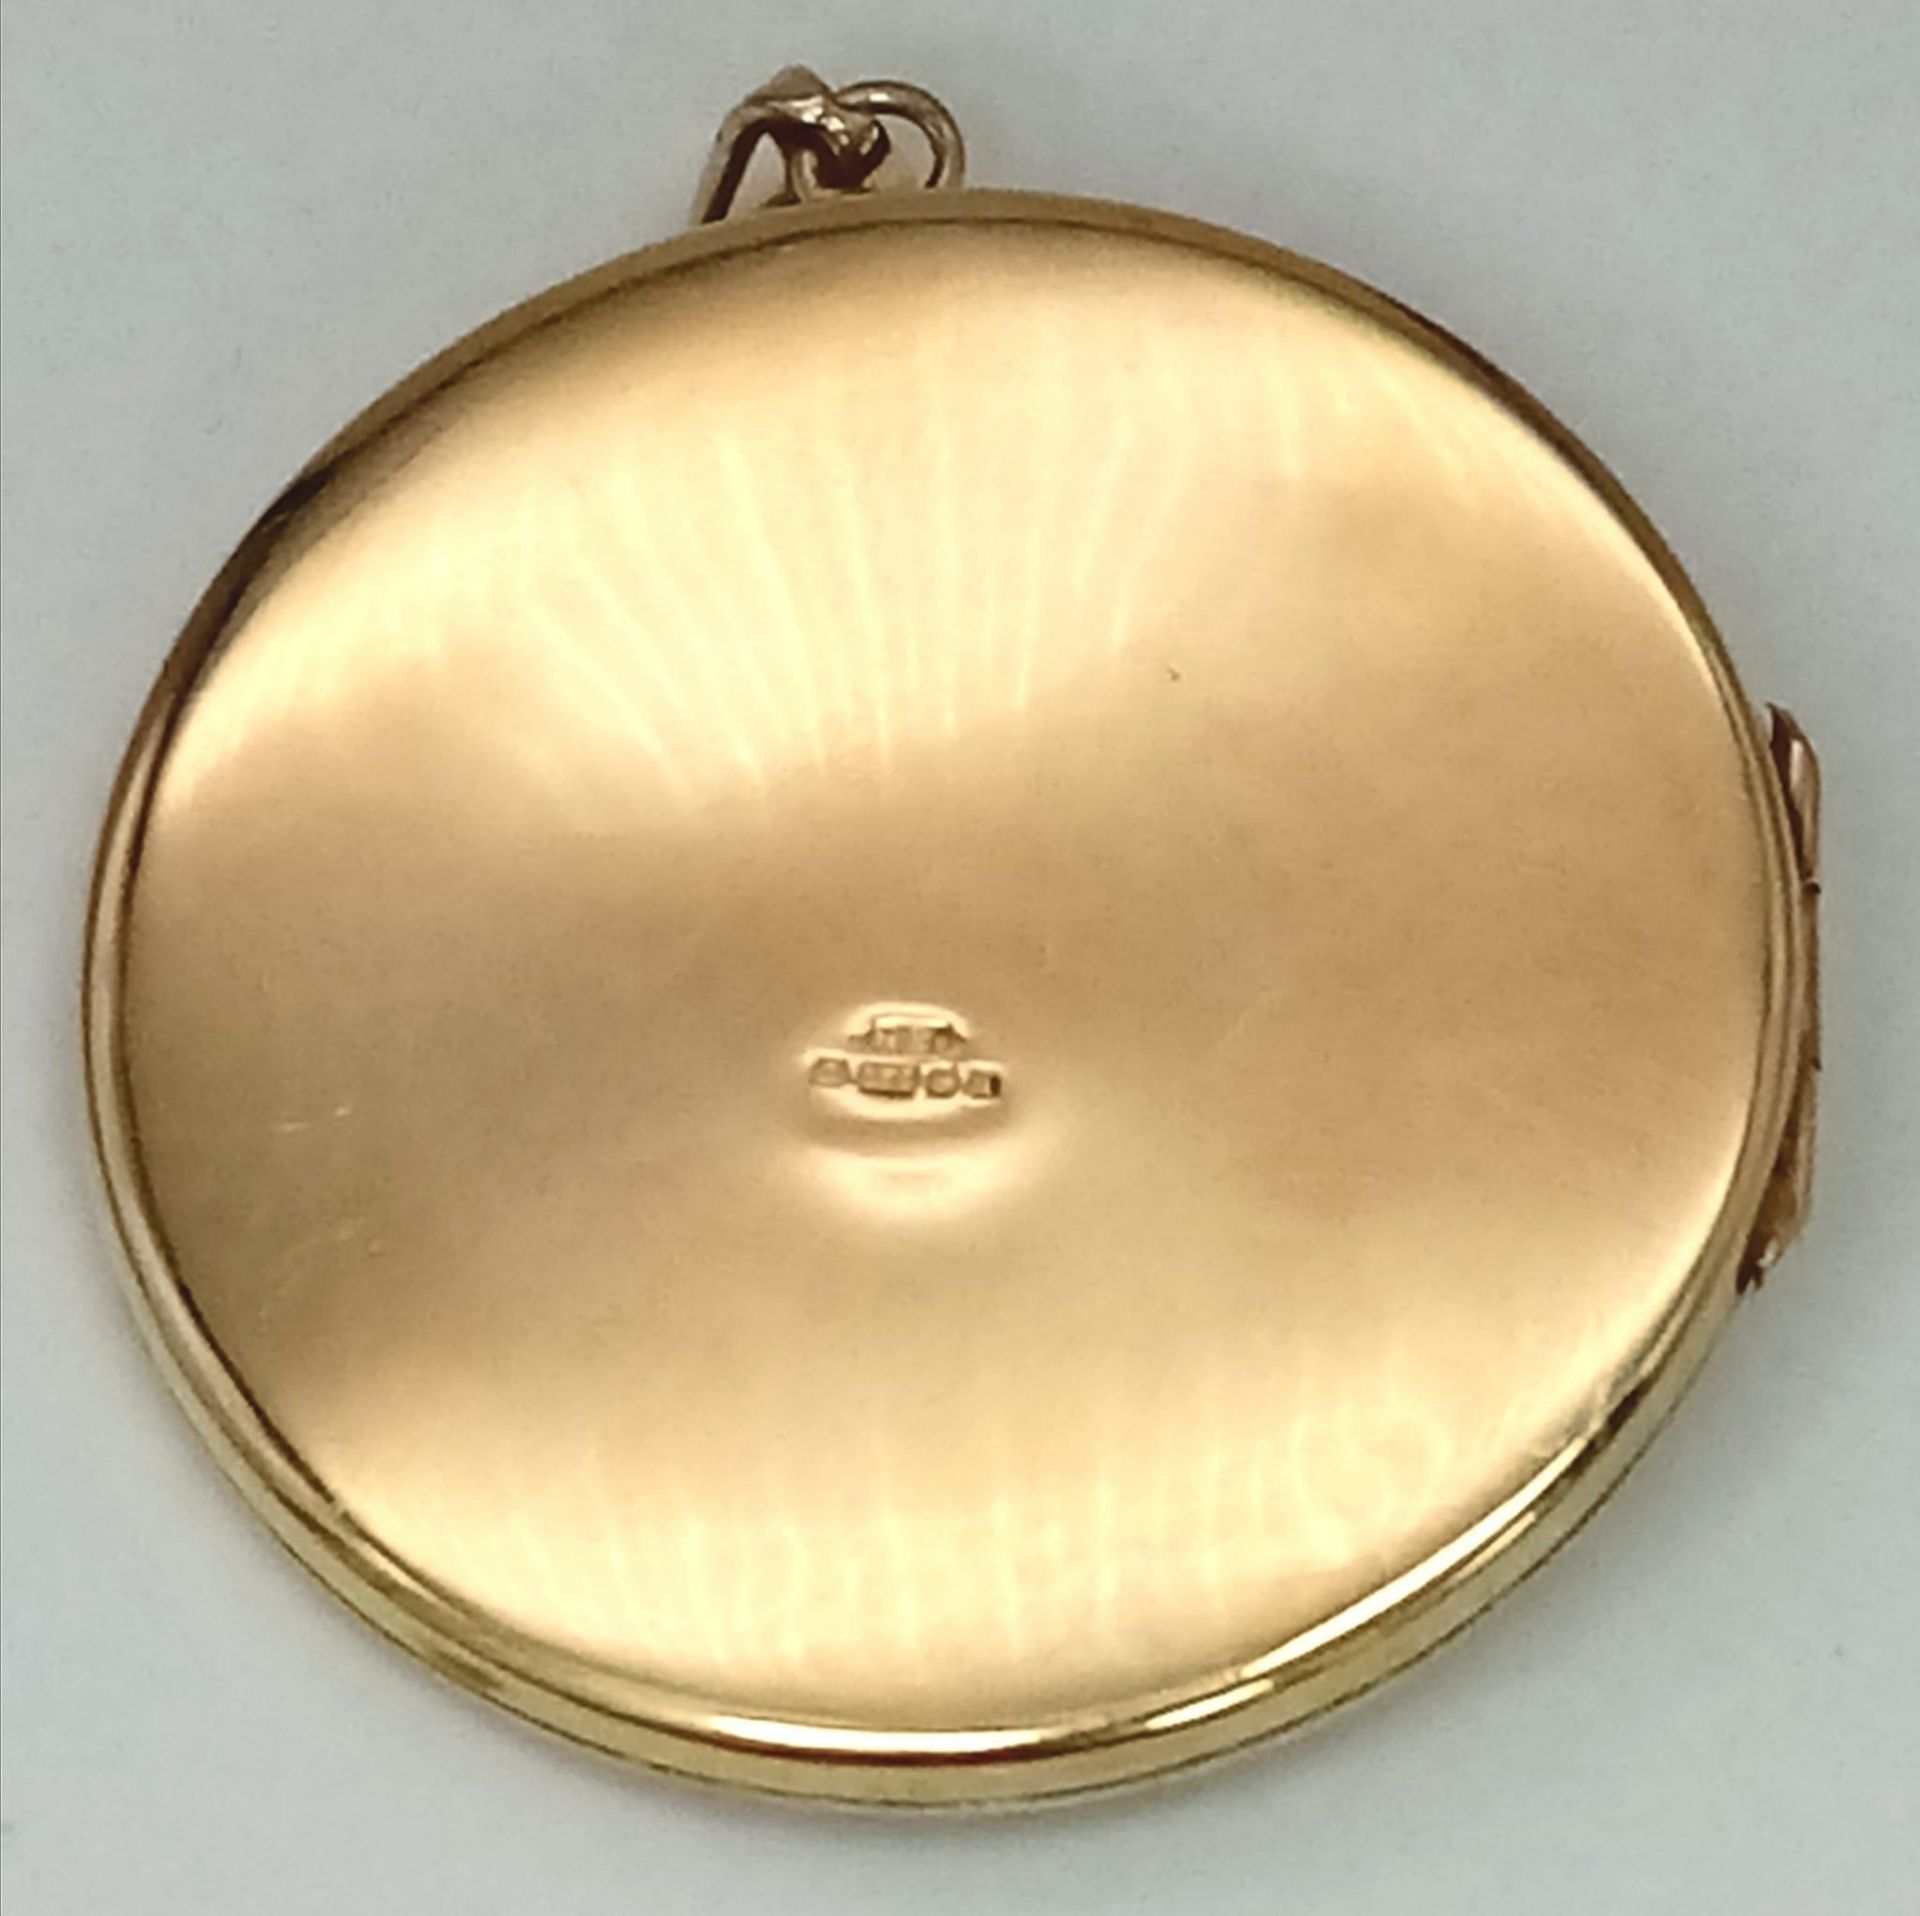 A SOLID 9K GOLD LOCKET STYLE PENDANT WITH GARNET DECORATION . 20.4gms 4.5cms DIAMETER 14954 - Image 5 of 8